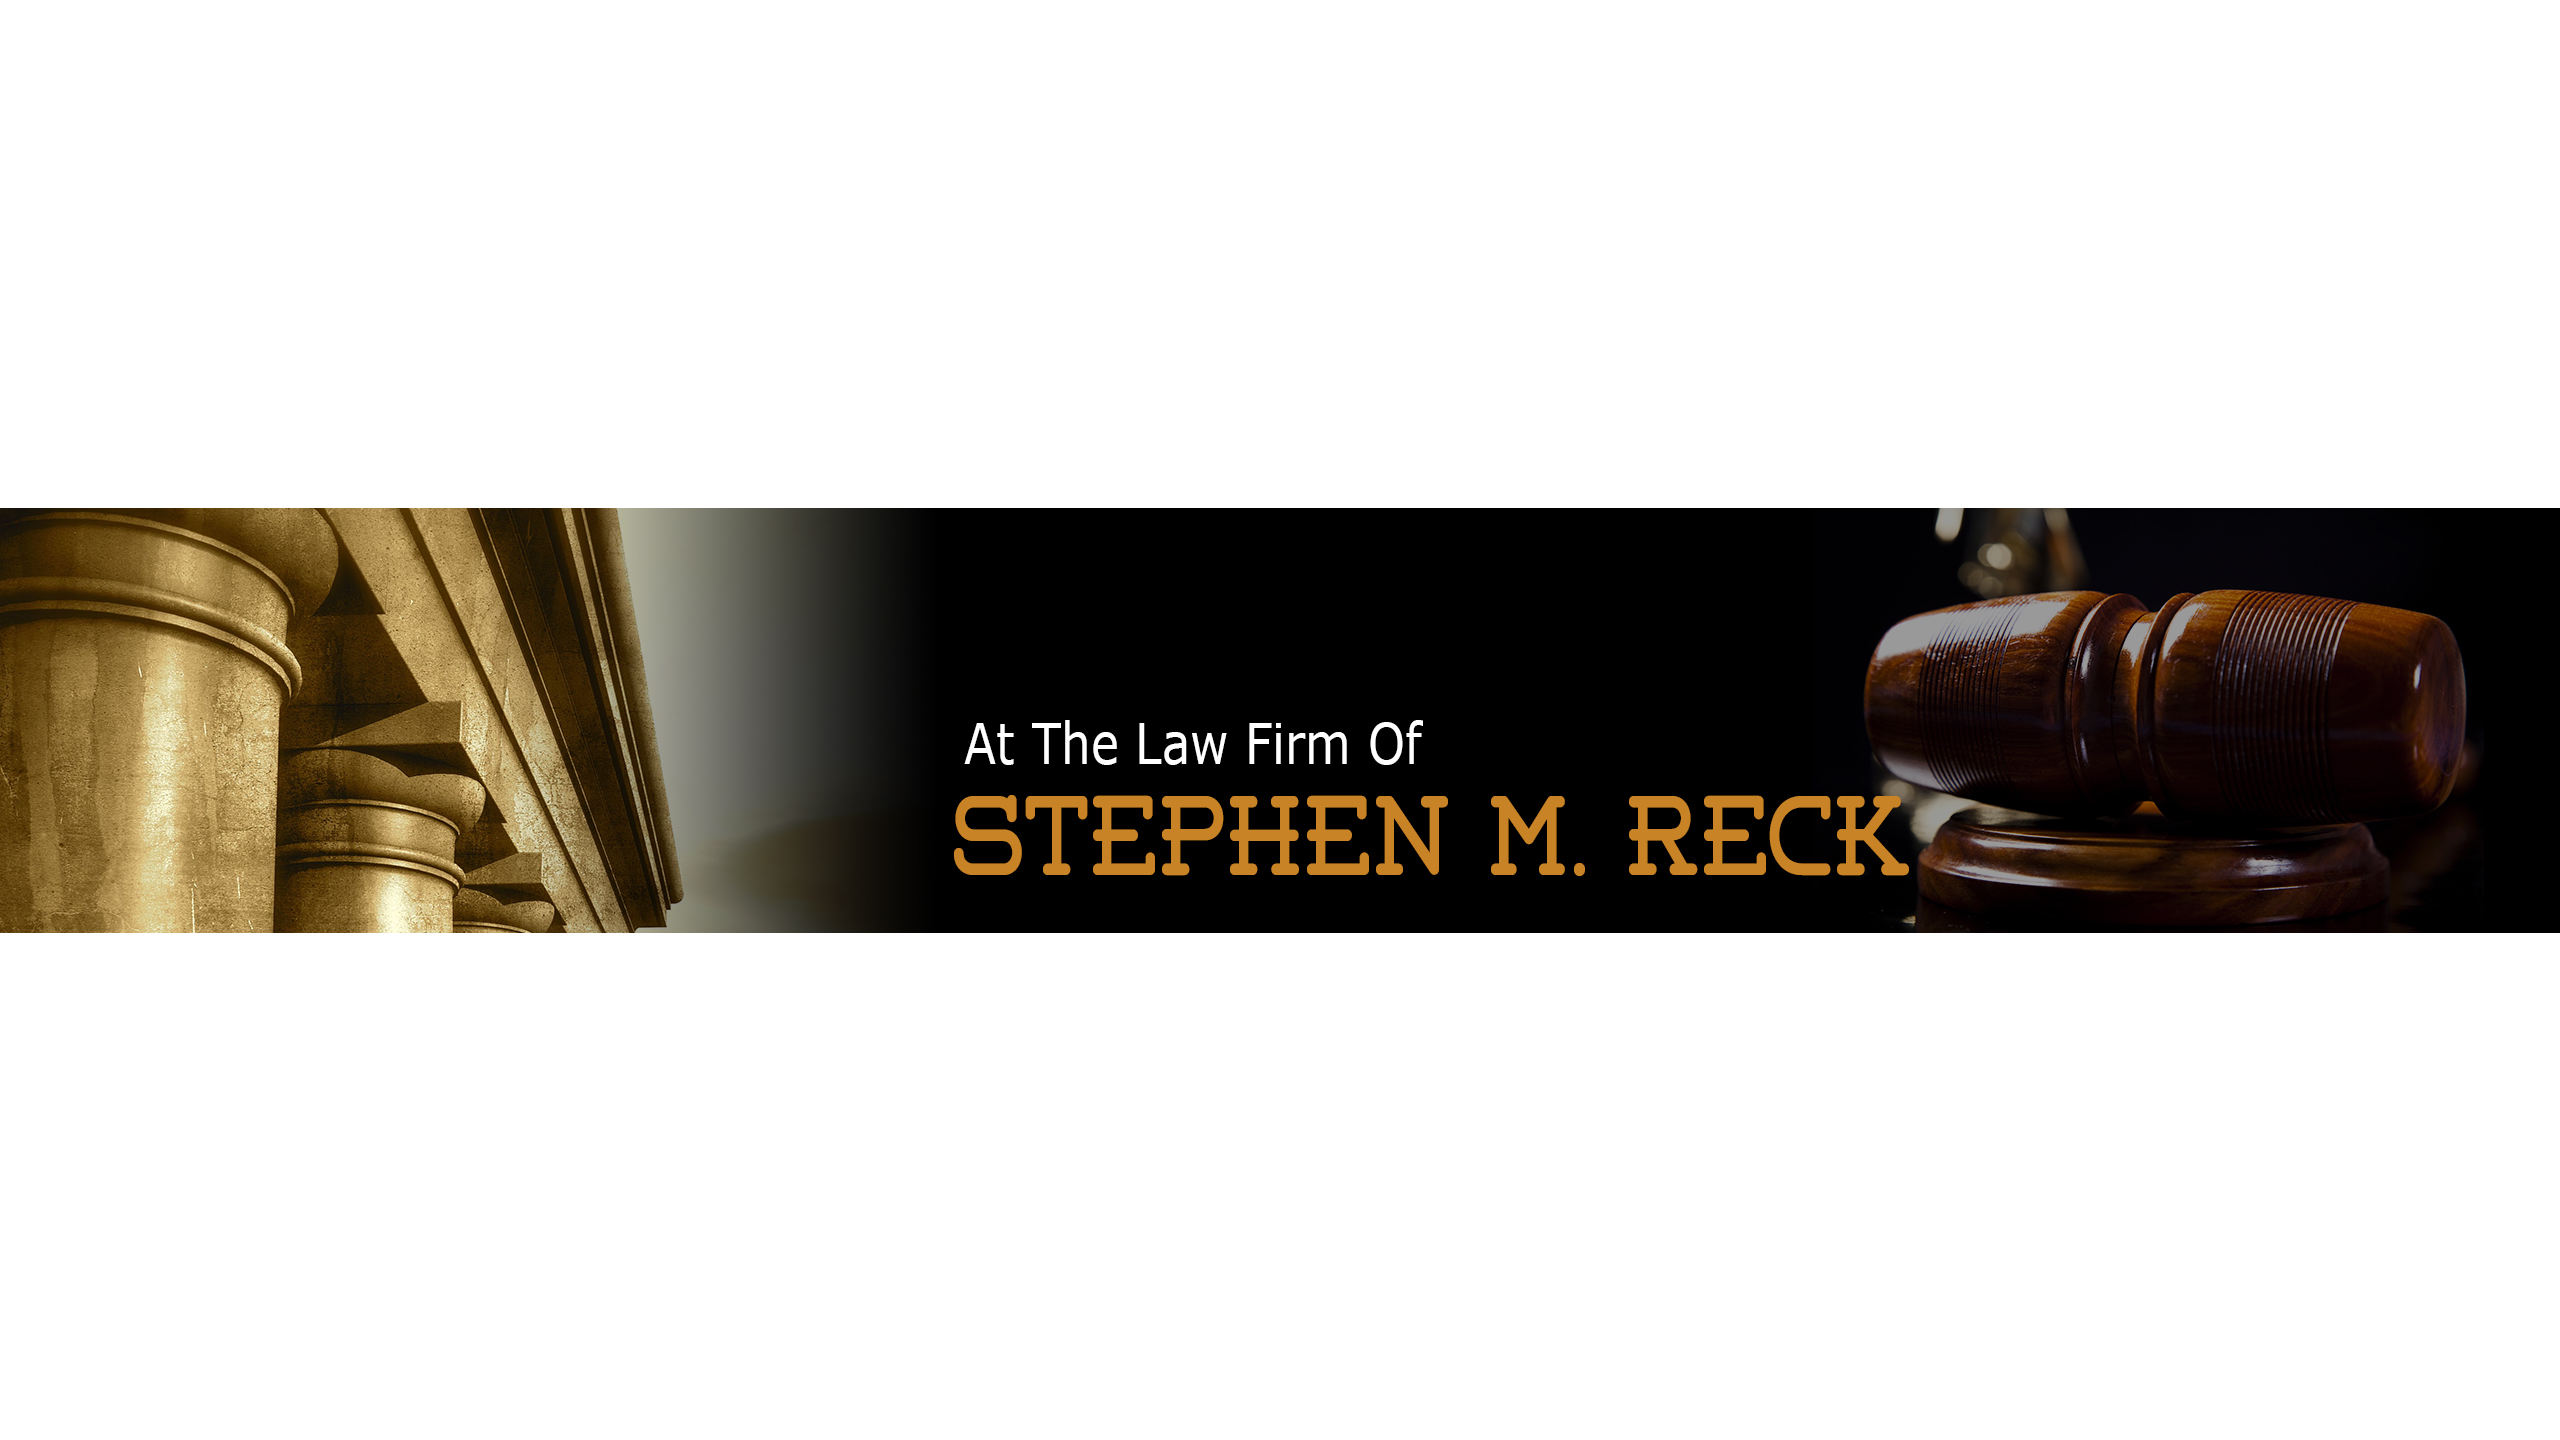 The Law Firm Of Stephen M. Reck